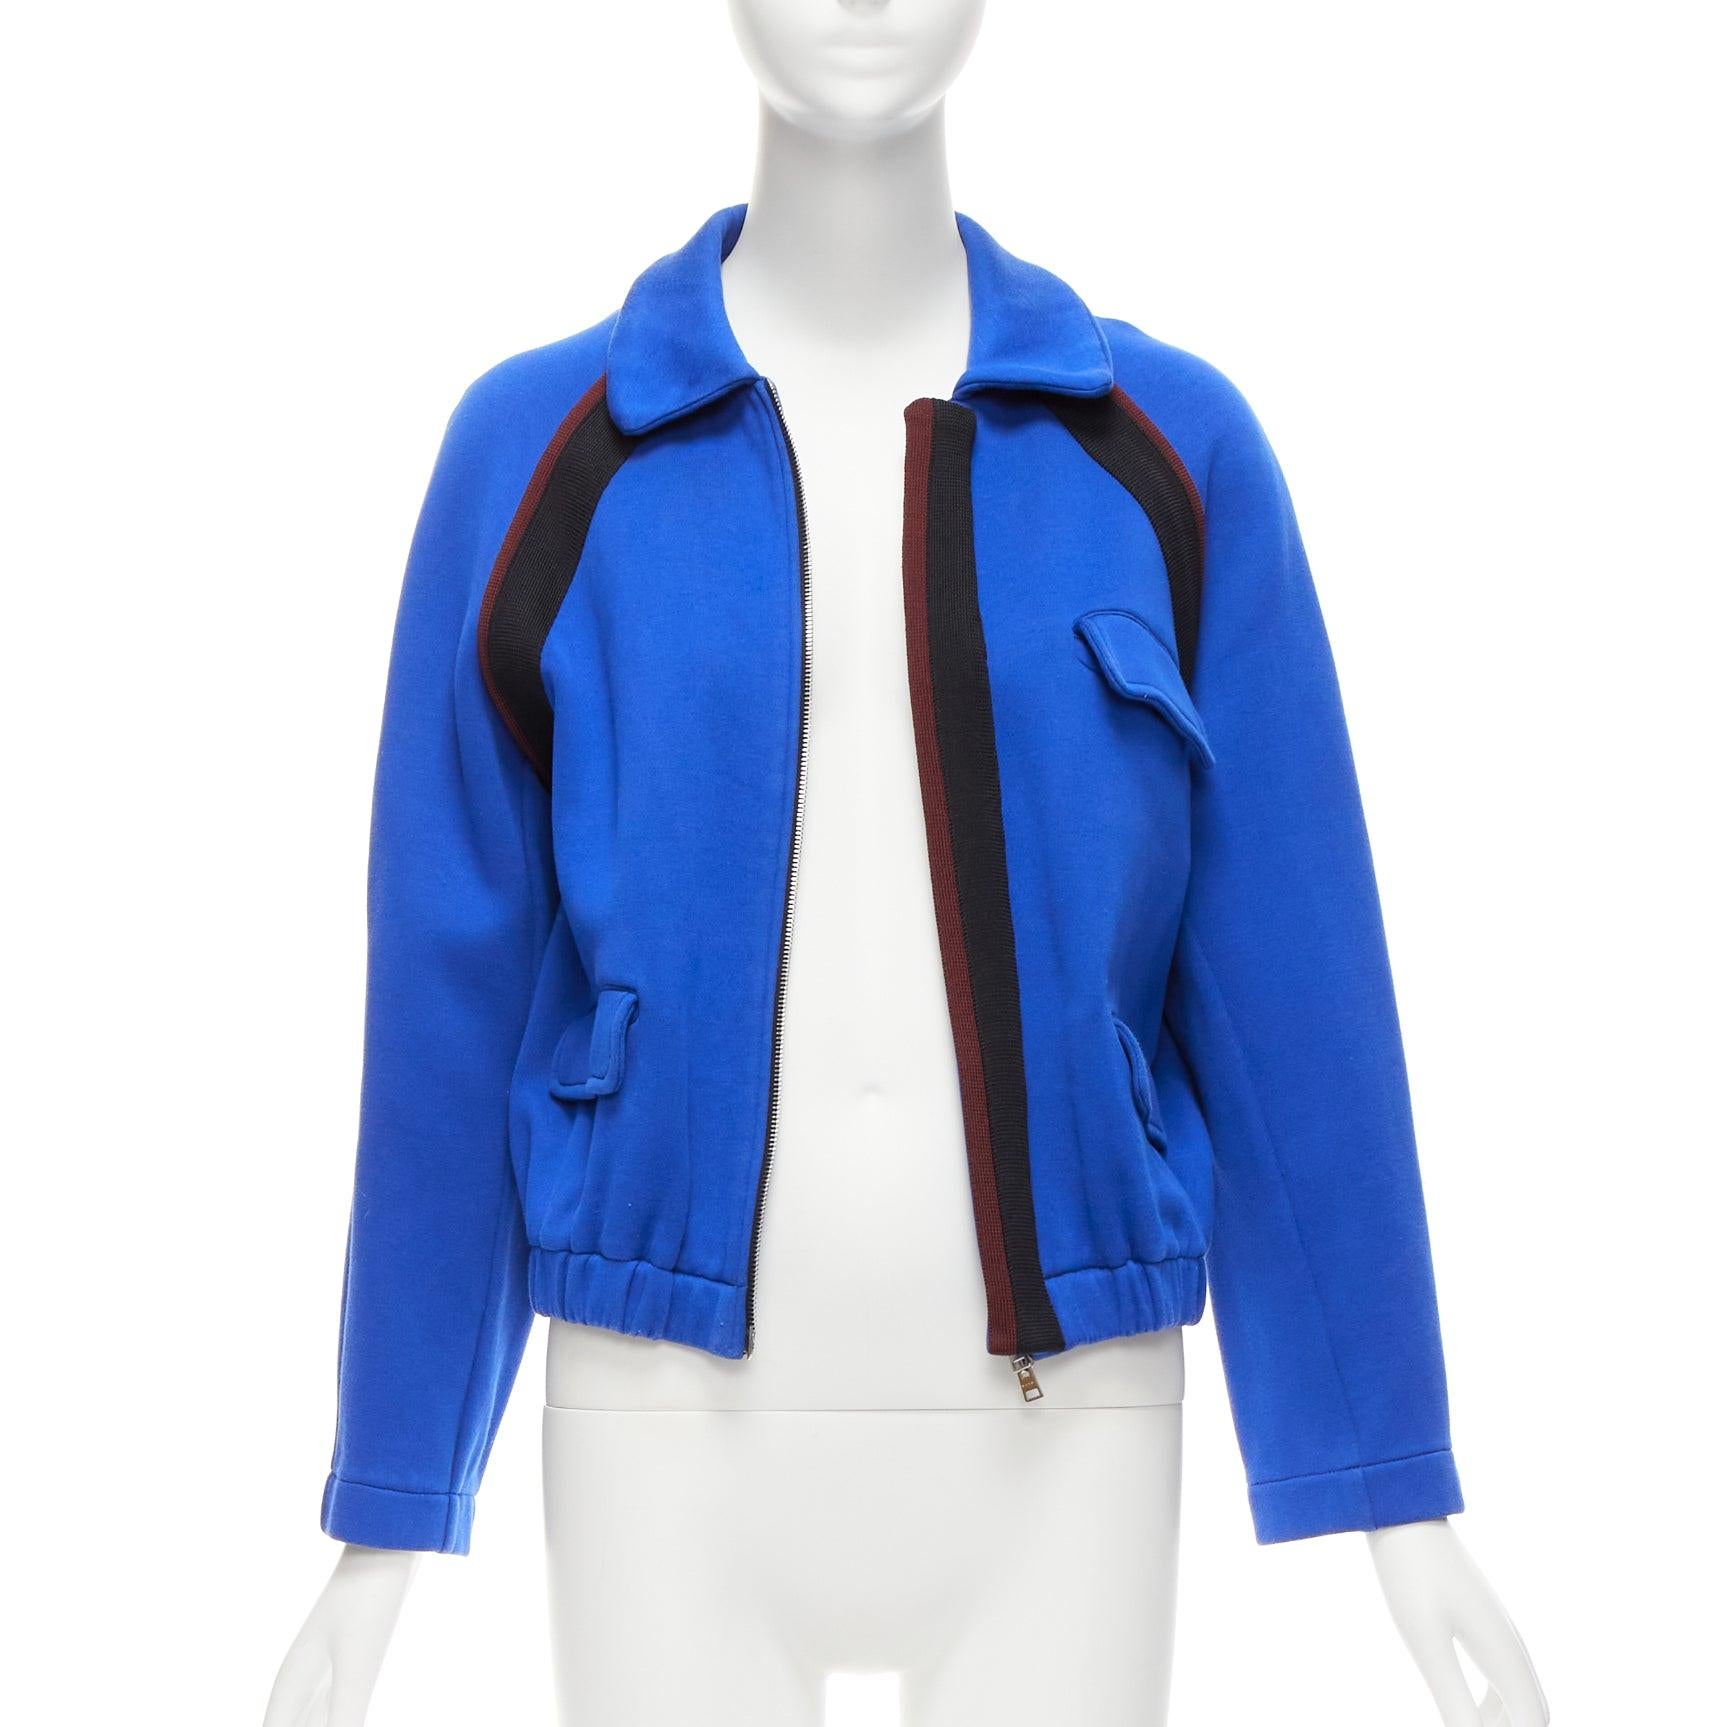 MARNI electric blue track suit raglan bomber jacket IT38 XS
Reference: CELG/A00238
Brand: Marni
Material: Cotton, Blend
Color: Blue, Multicolour
Pattern: Solid
Closure: Zip
Lining: Brown Fabric
Made in: Italy

CONDITION:
Condition: Very good, this